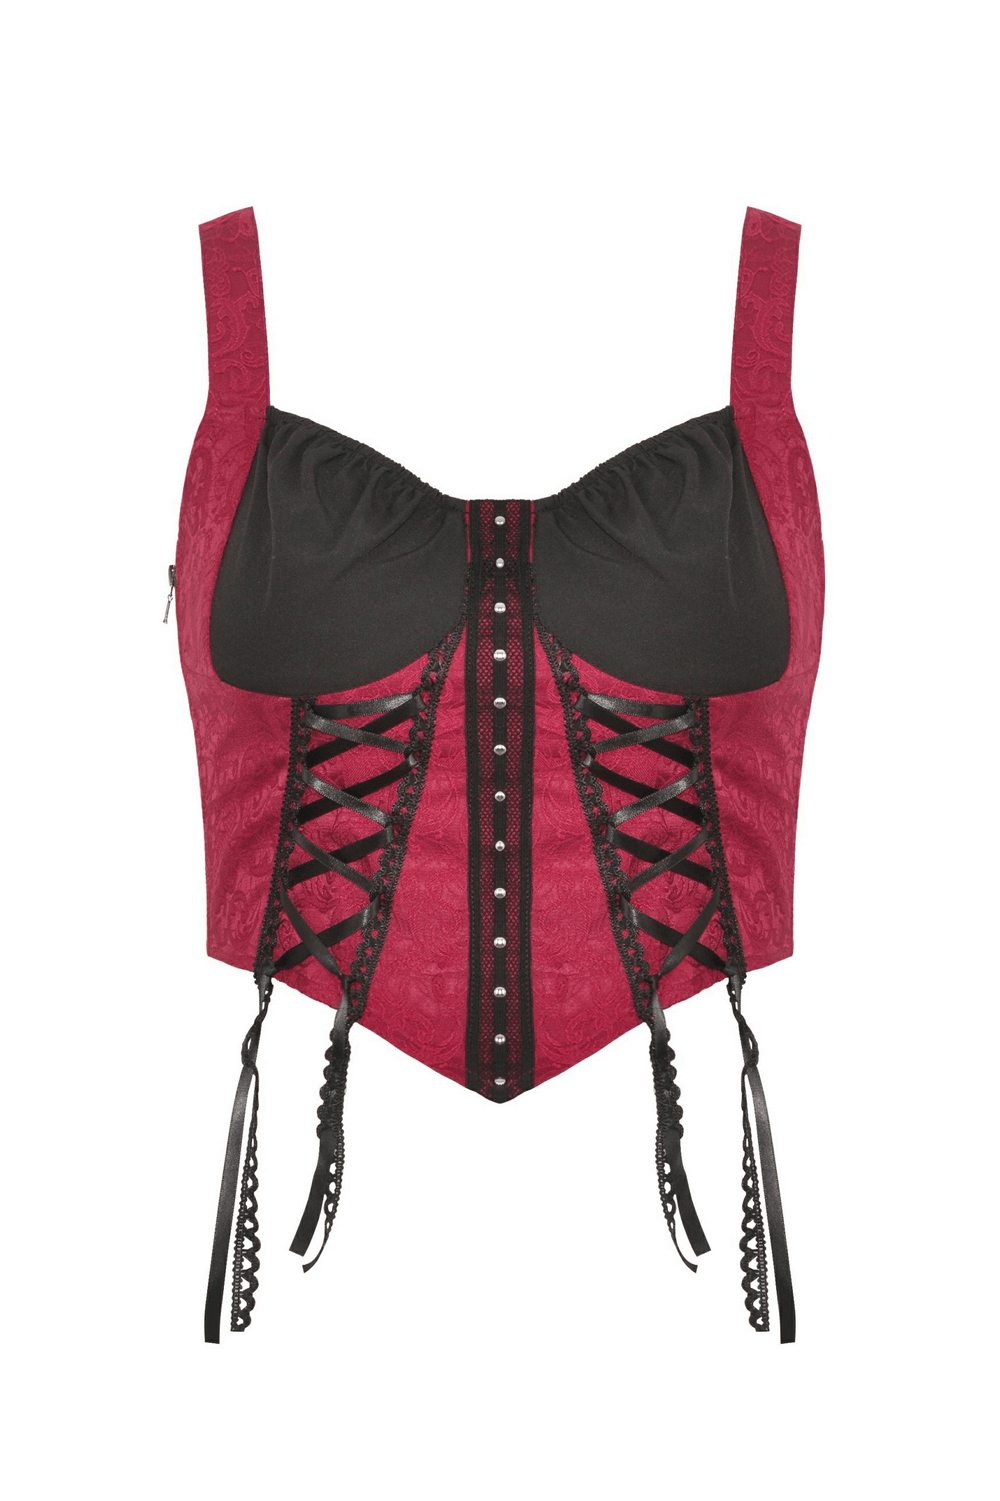 Elegant Lace-Up Corset with Black Accents and Lace Ties